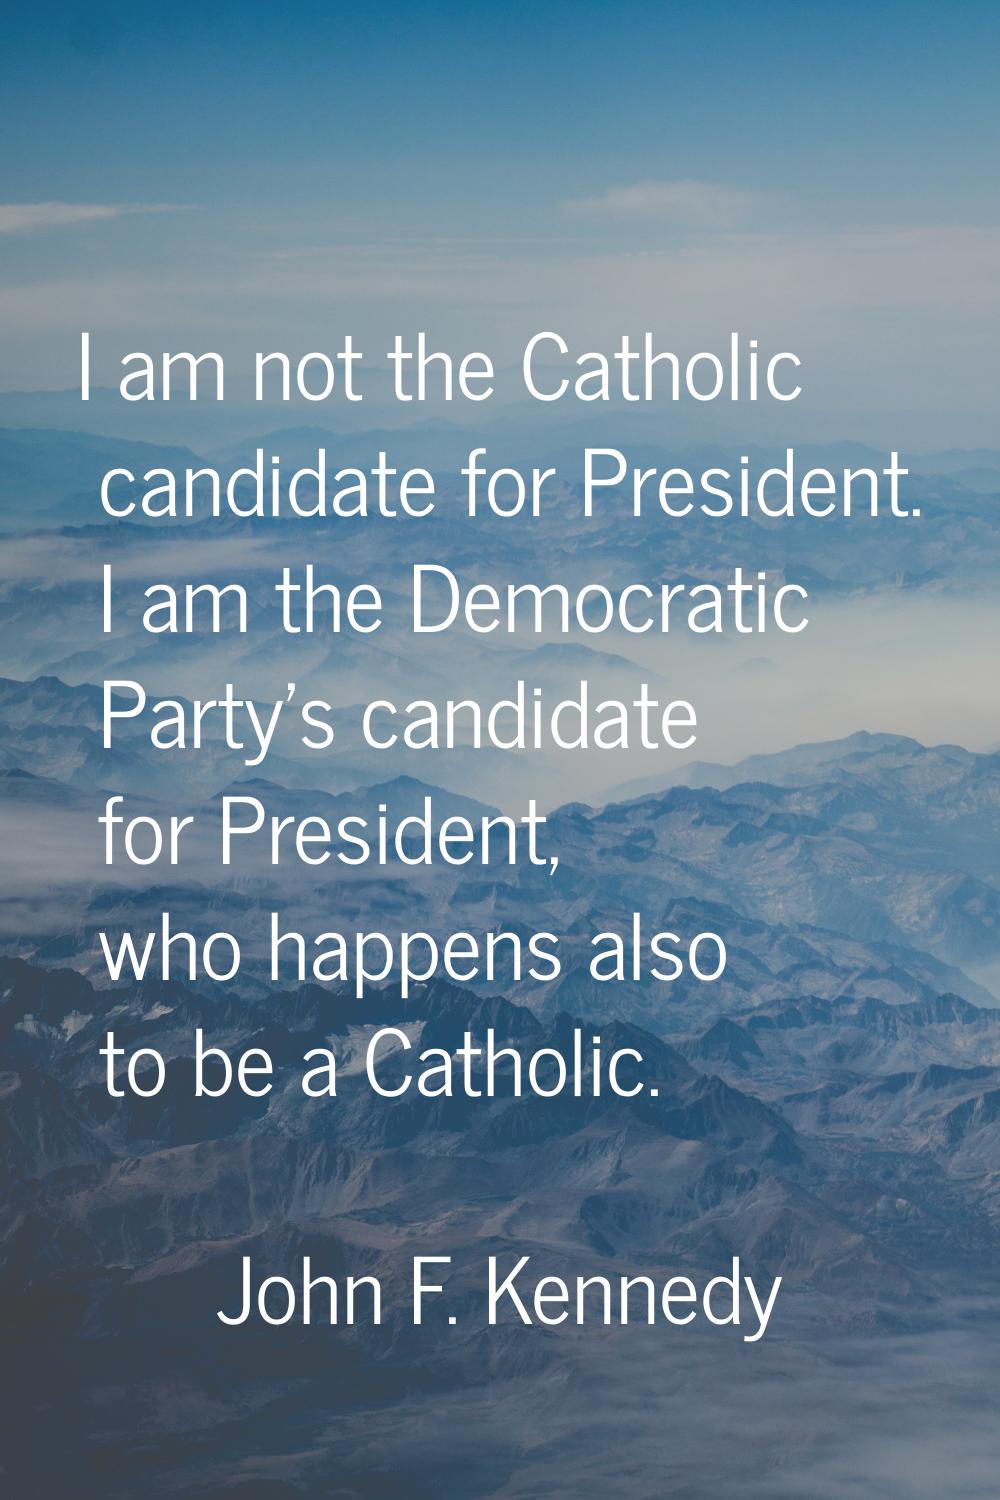 I am not the Catholic candidate for President. I am the Democratic Party's candidate for President,